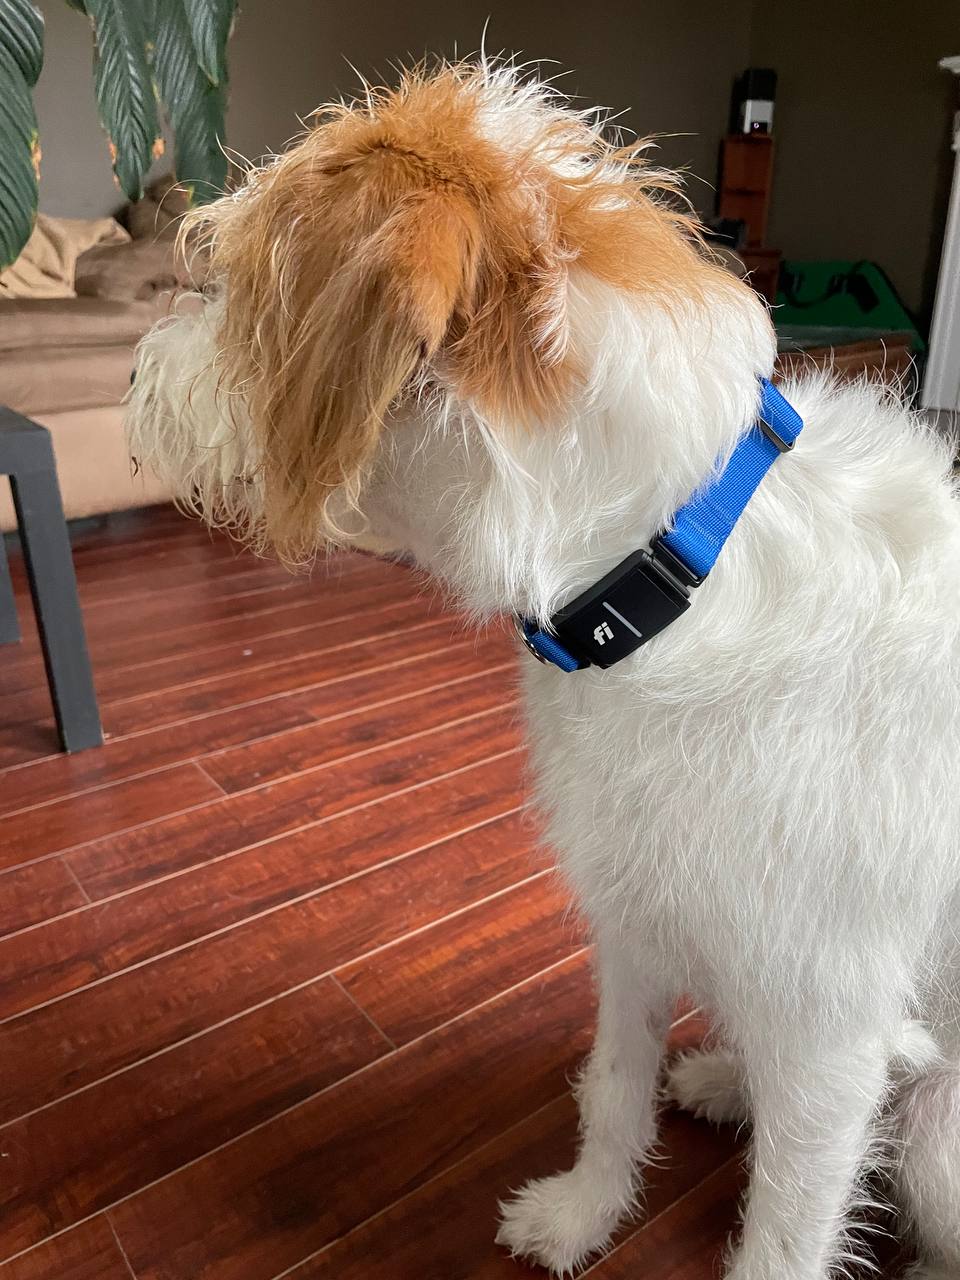 The large size of Fi Series 3 collar fits my dog